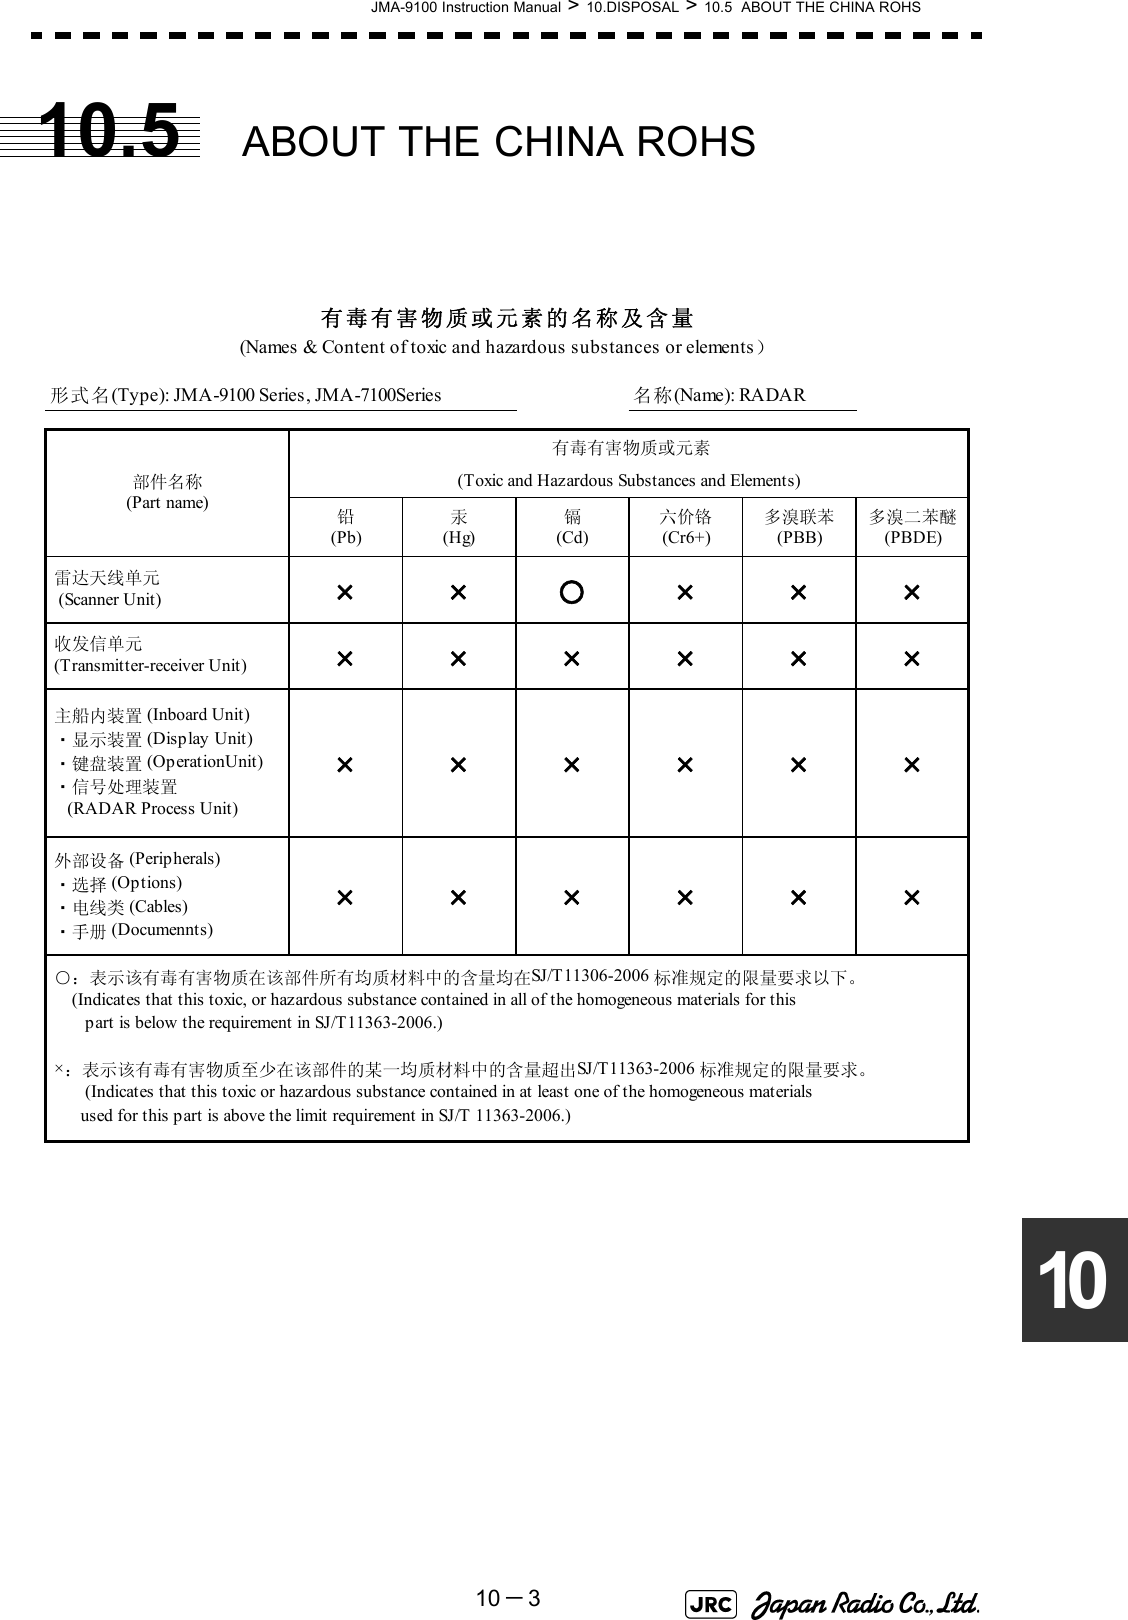 JMA-9100 Instruction Manual &gt; 10.DISPOSAL &gt; 10.5  ABOUT THE CHINA ROHS10－31010.5 ABOUT THE CHINA ROHS 形式名(Type): JMA-9100 Series , JMA-7100Series 名称(Name): RADAR铅 汞 镉 六价铬 多溴联苯 多溴二苯醚(Pb) (Hg) (Cd) (Cr6+) (PBB) (PBDE) 雷达天线单元  (Scanner Unit)××○××× 收发信单元 (T ransmitter-receiver Unit)×××××× 主船内装置 (Inboard Unit) ・显示装置 (Display Unit) ・键盘装置 (OperationUnit) ・信号处理装置    (RADAR Process Unit)×××××× 外部设备 (Peripherals) ・选择 (Options) ・电线类 (Cables) ・手册 (Documennts)××××××有毒有害物质或元素的名称及含量(Names &amp; Content of toxic and hazardous substances or elements）(Toxic and Hazardous Substances and Elements) ×：表示该有毒有害物质至少在该部件的某一均质材料中的含量超出SJ/T11363-2006 标准规定的限量要求。　　(Indicates that this toxic or hazardous substance contained in at least one of the homogeneous materials       used for this part is above the limit requirement in SJ/T 11363-2006.) ○：表示该有毒有害物质在该部件所有均质材料中的含量均在SJ/T11306-2006 标准规定的限量要求以下。     (Indicates that this toxic, or hazardous substance contained in all of the homogeneous materials for this        part is below the requirement in SJ/T11363-2006.)部件名称(Part name) 有毒有害物质或元素